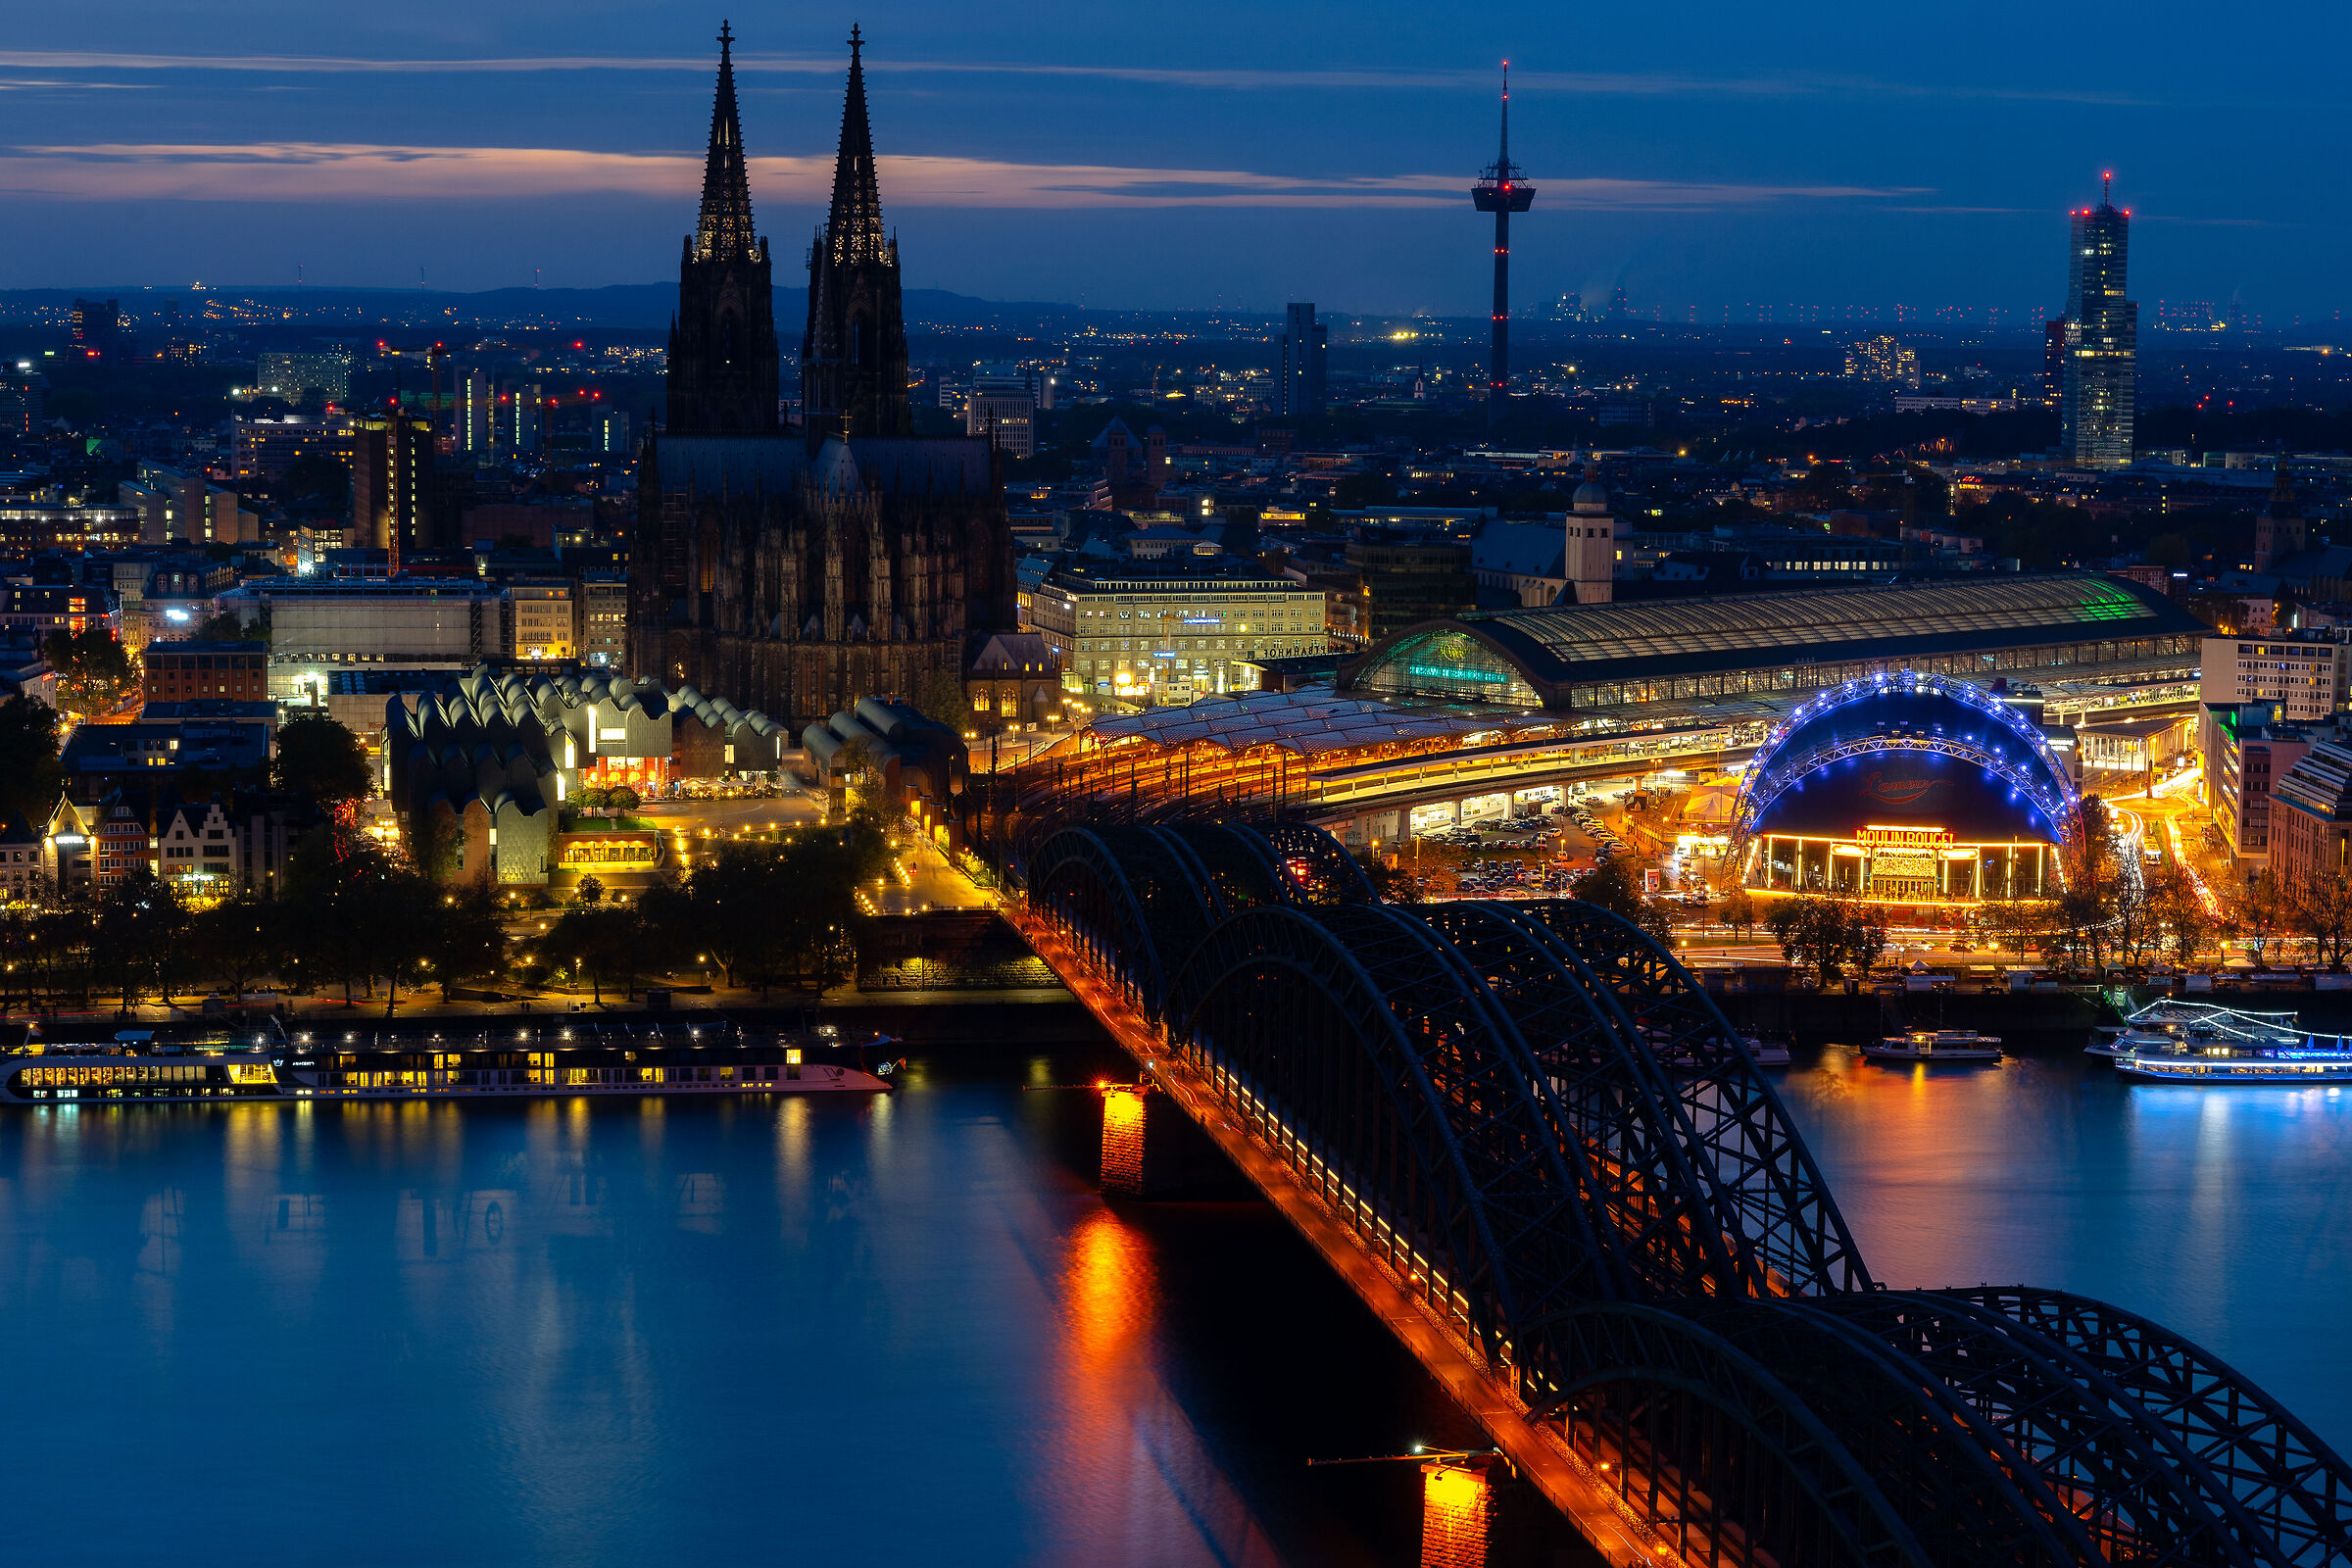 Cologne at sunset...